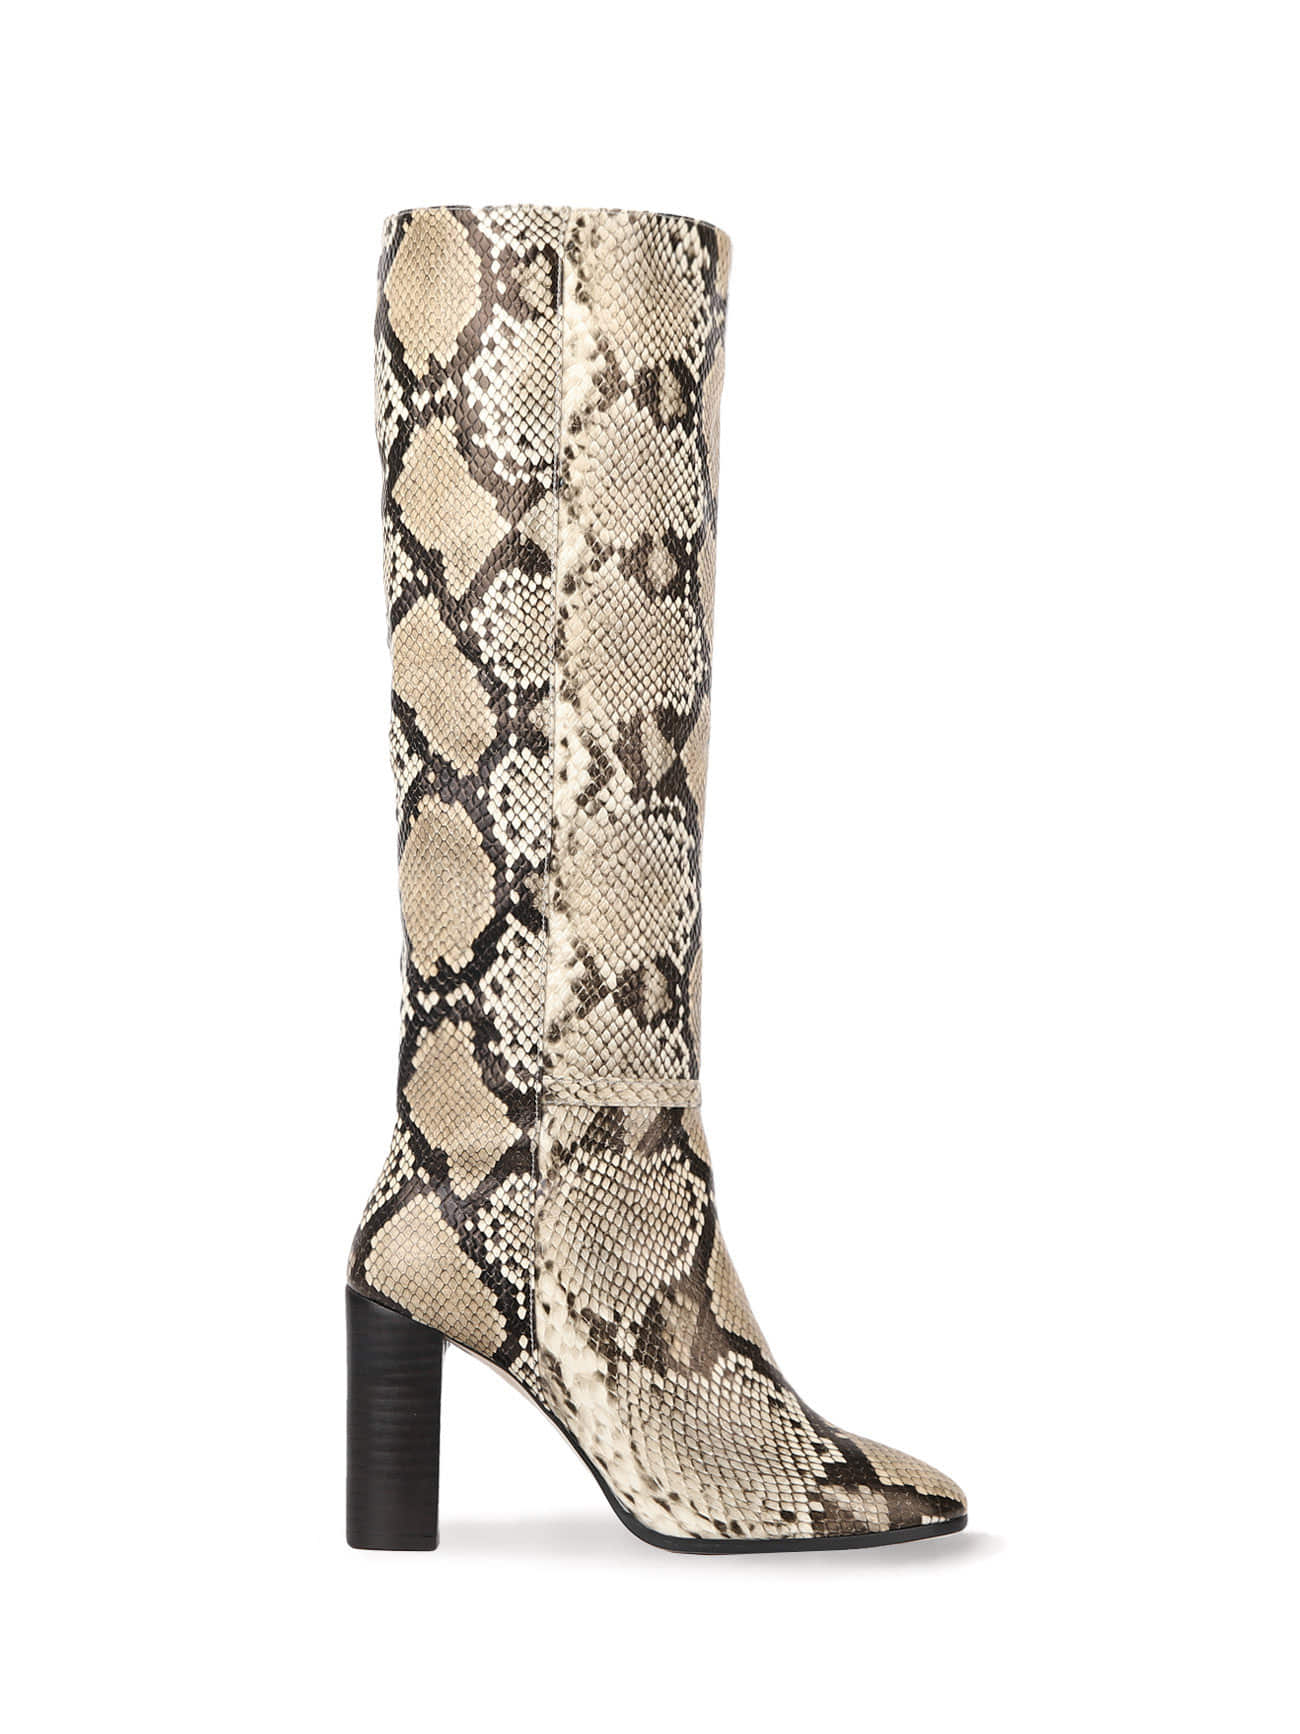 KATE LEATHER KNEE BOOTS - GRAY PYTHON